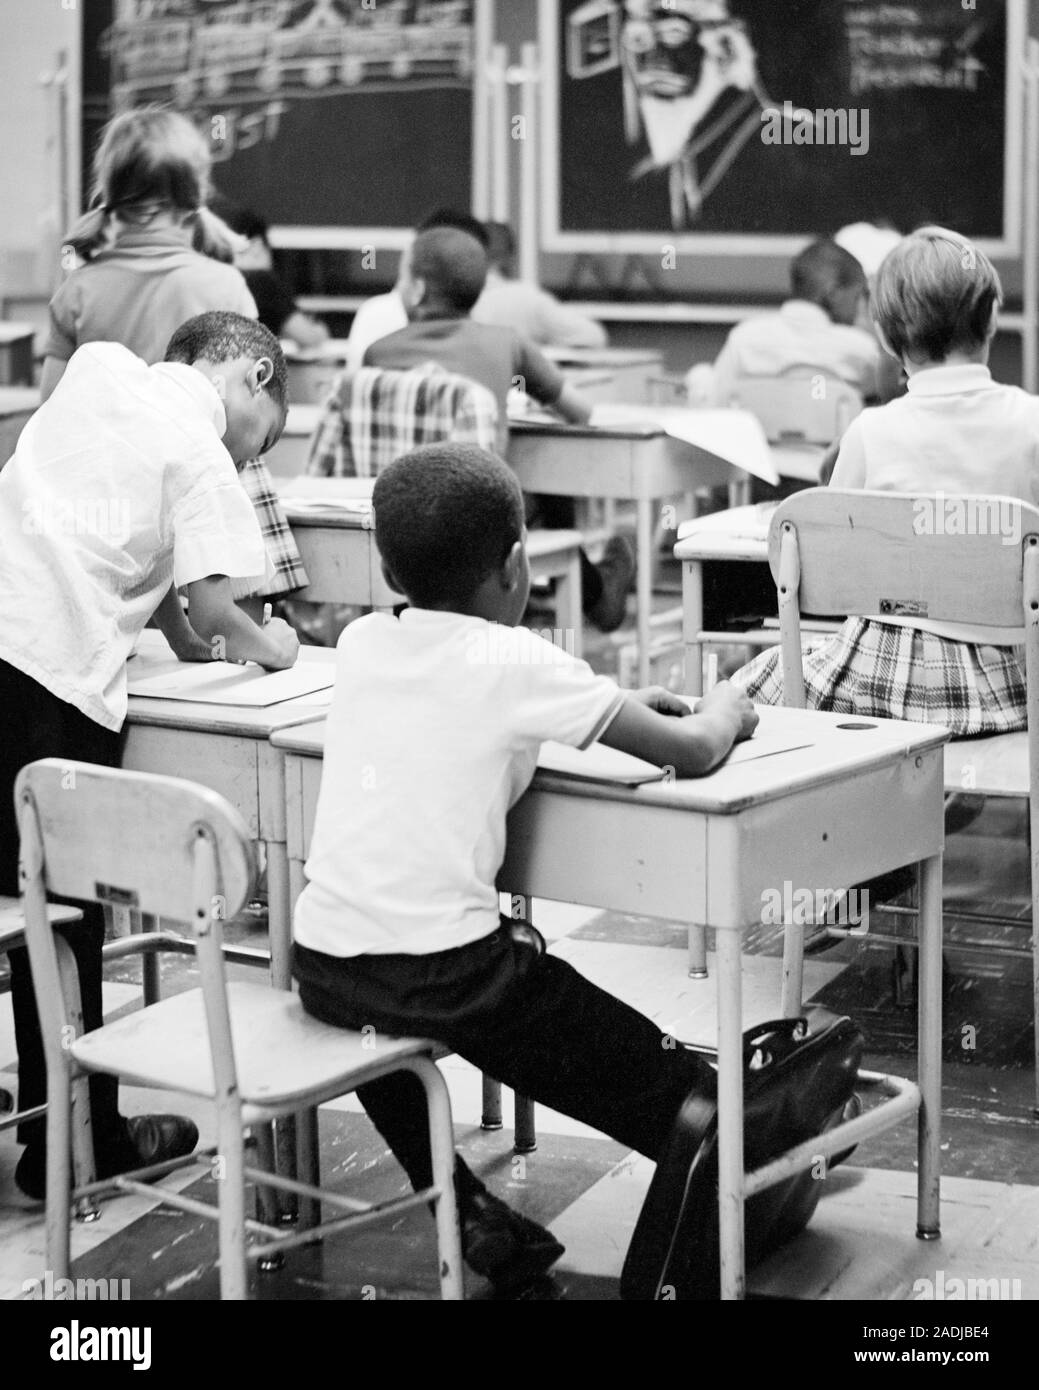 Old Fashioned Classroom Black And White Stock Photos Images Alamy